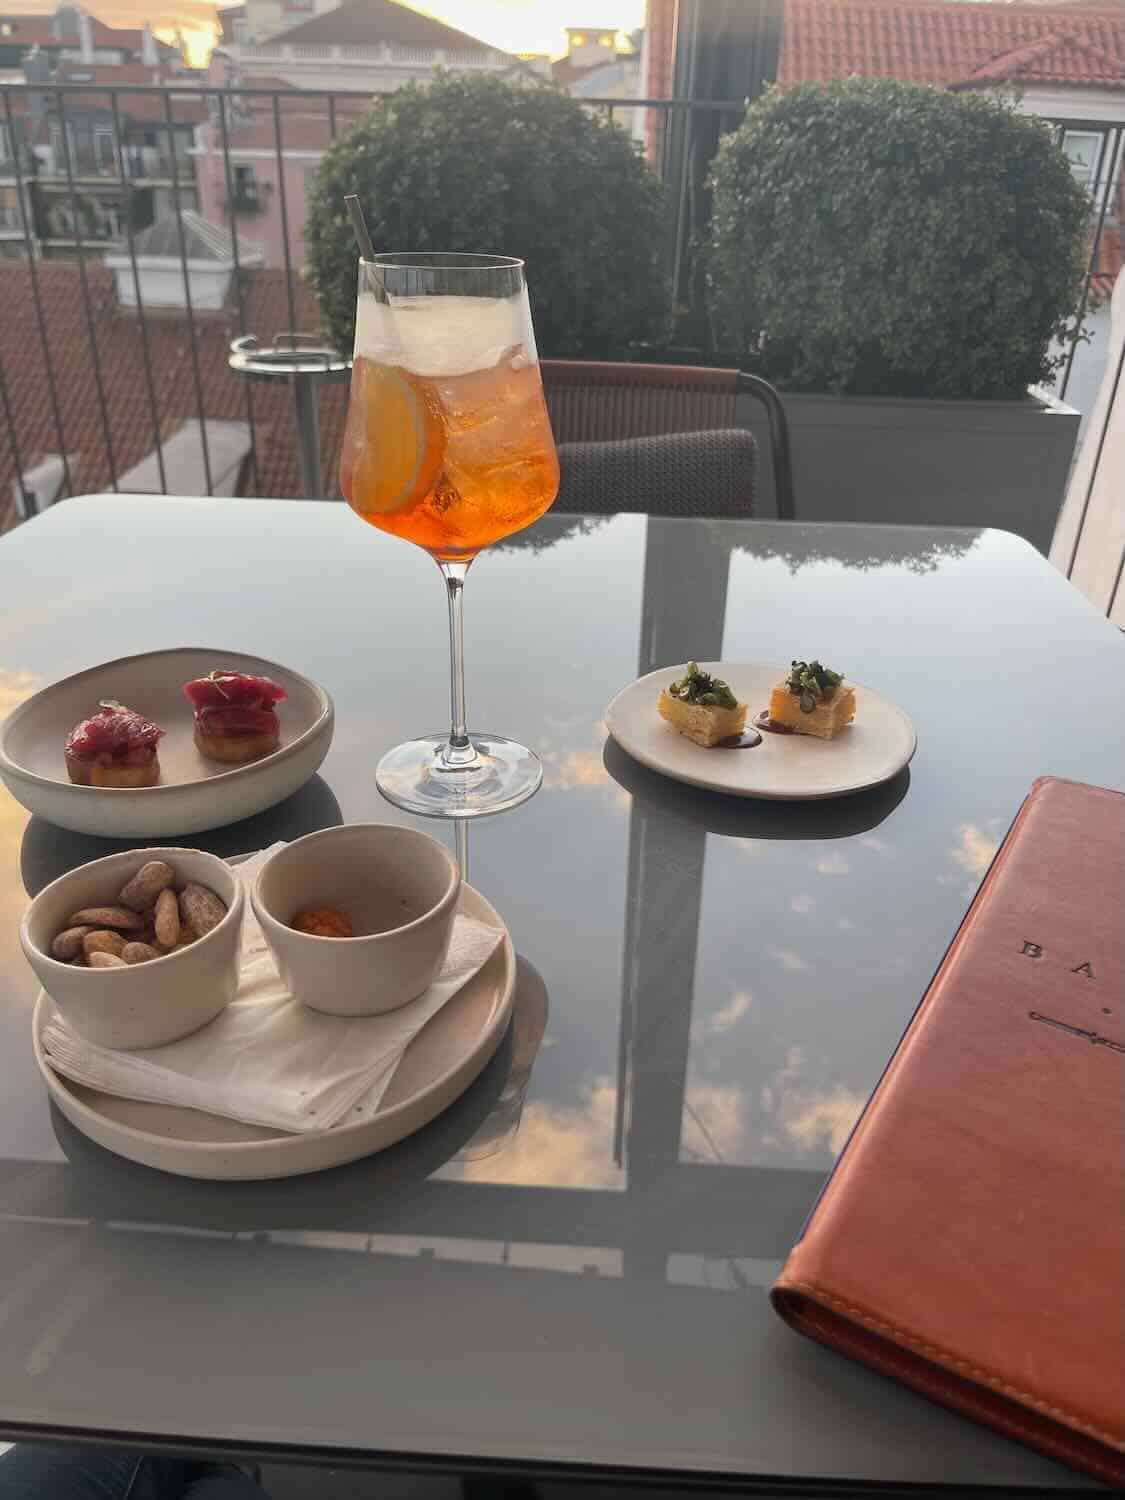 A refreshing Aperol spritz and a selection of gourmet appetizers on an outdoor terrace with a view of Lisbon's charming rooftops at dusk.